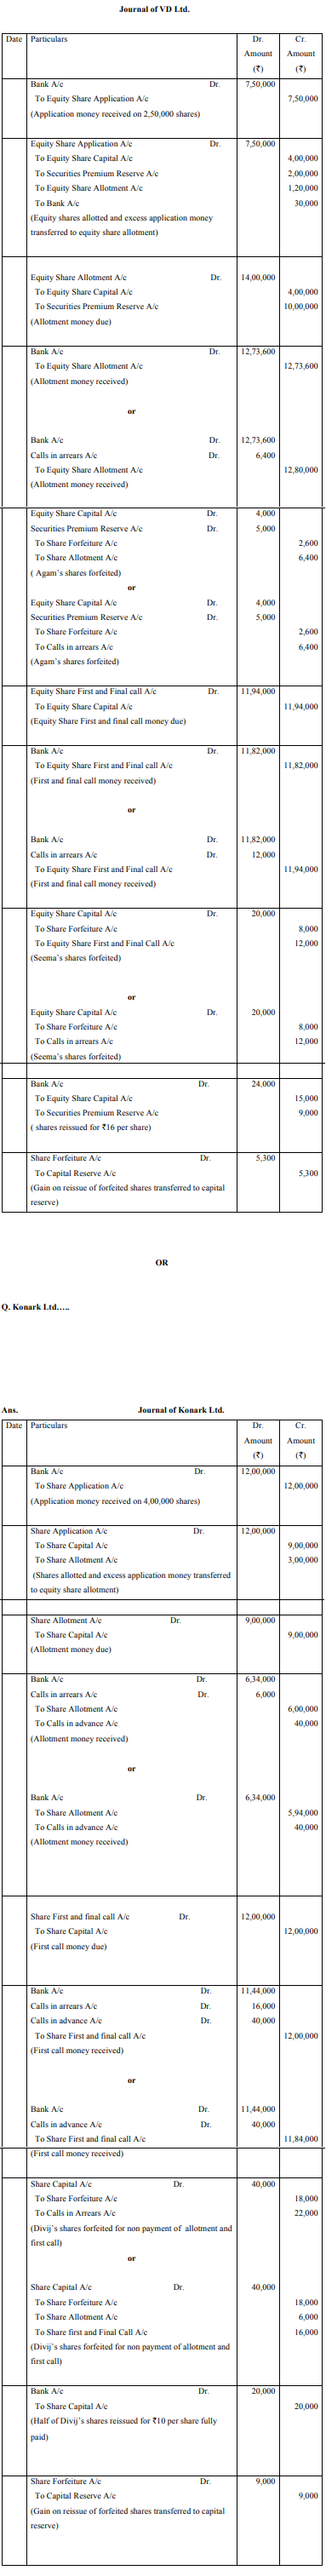 V.D. Ltd. invited applications for issuing 2,00,000 equity shares of < 10 